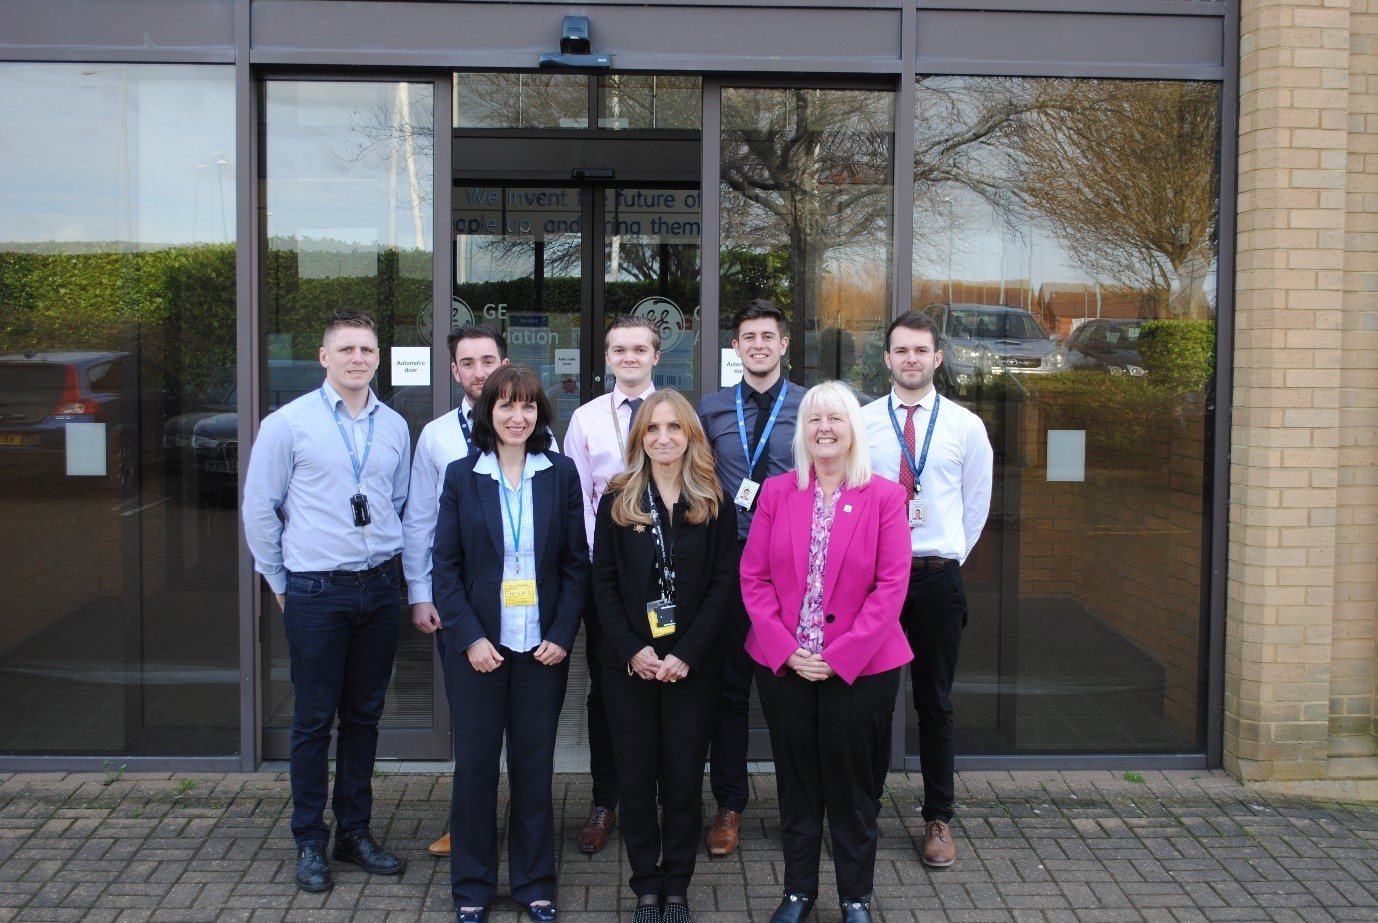 The first ever CMI Chartered Manager Degree Apprentices line up with Coventry University tutor Hannah Price, academic assessor Carol Forbes and CMI Apprenticeship Quality Manager Jocelyn Simmons. L-R: Ben Large, Greg Harwood, Hannah Price, Dan Taylor, Carol Forbes, Joe Haycock-Burton, Jocelyn Simmons, Harry Cleevely.